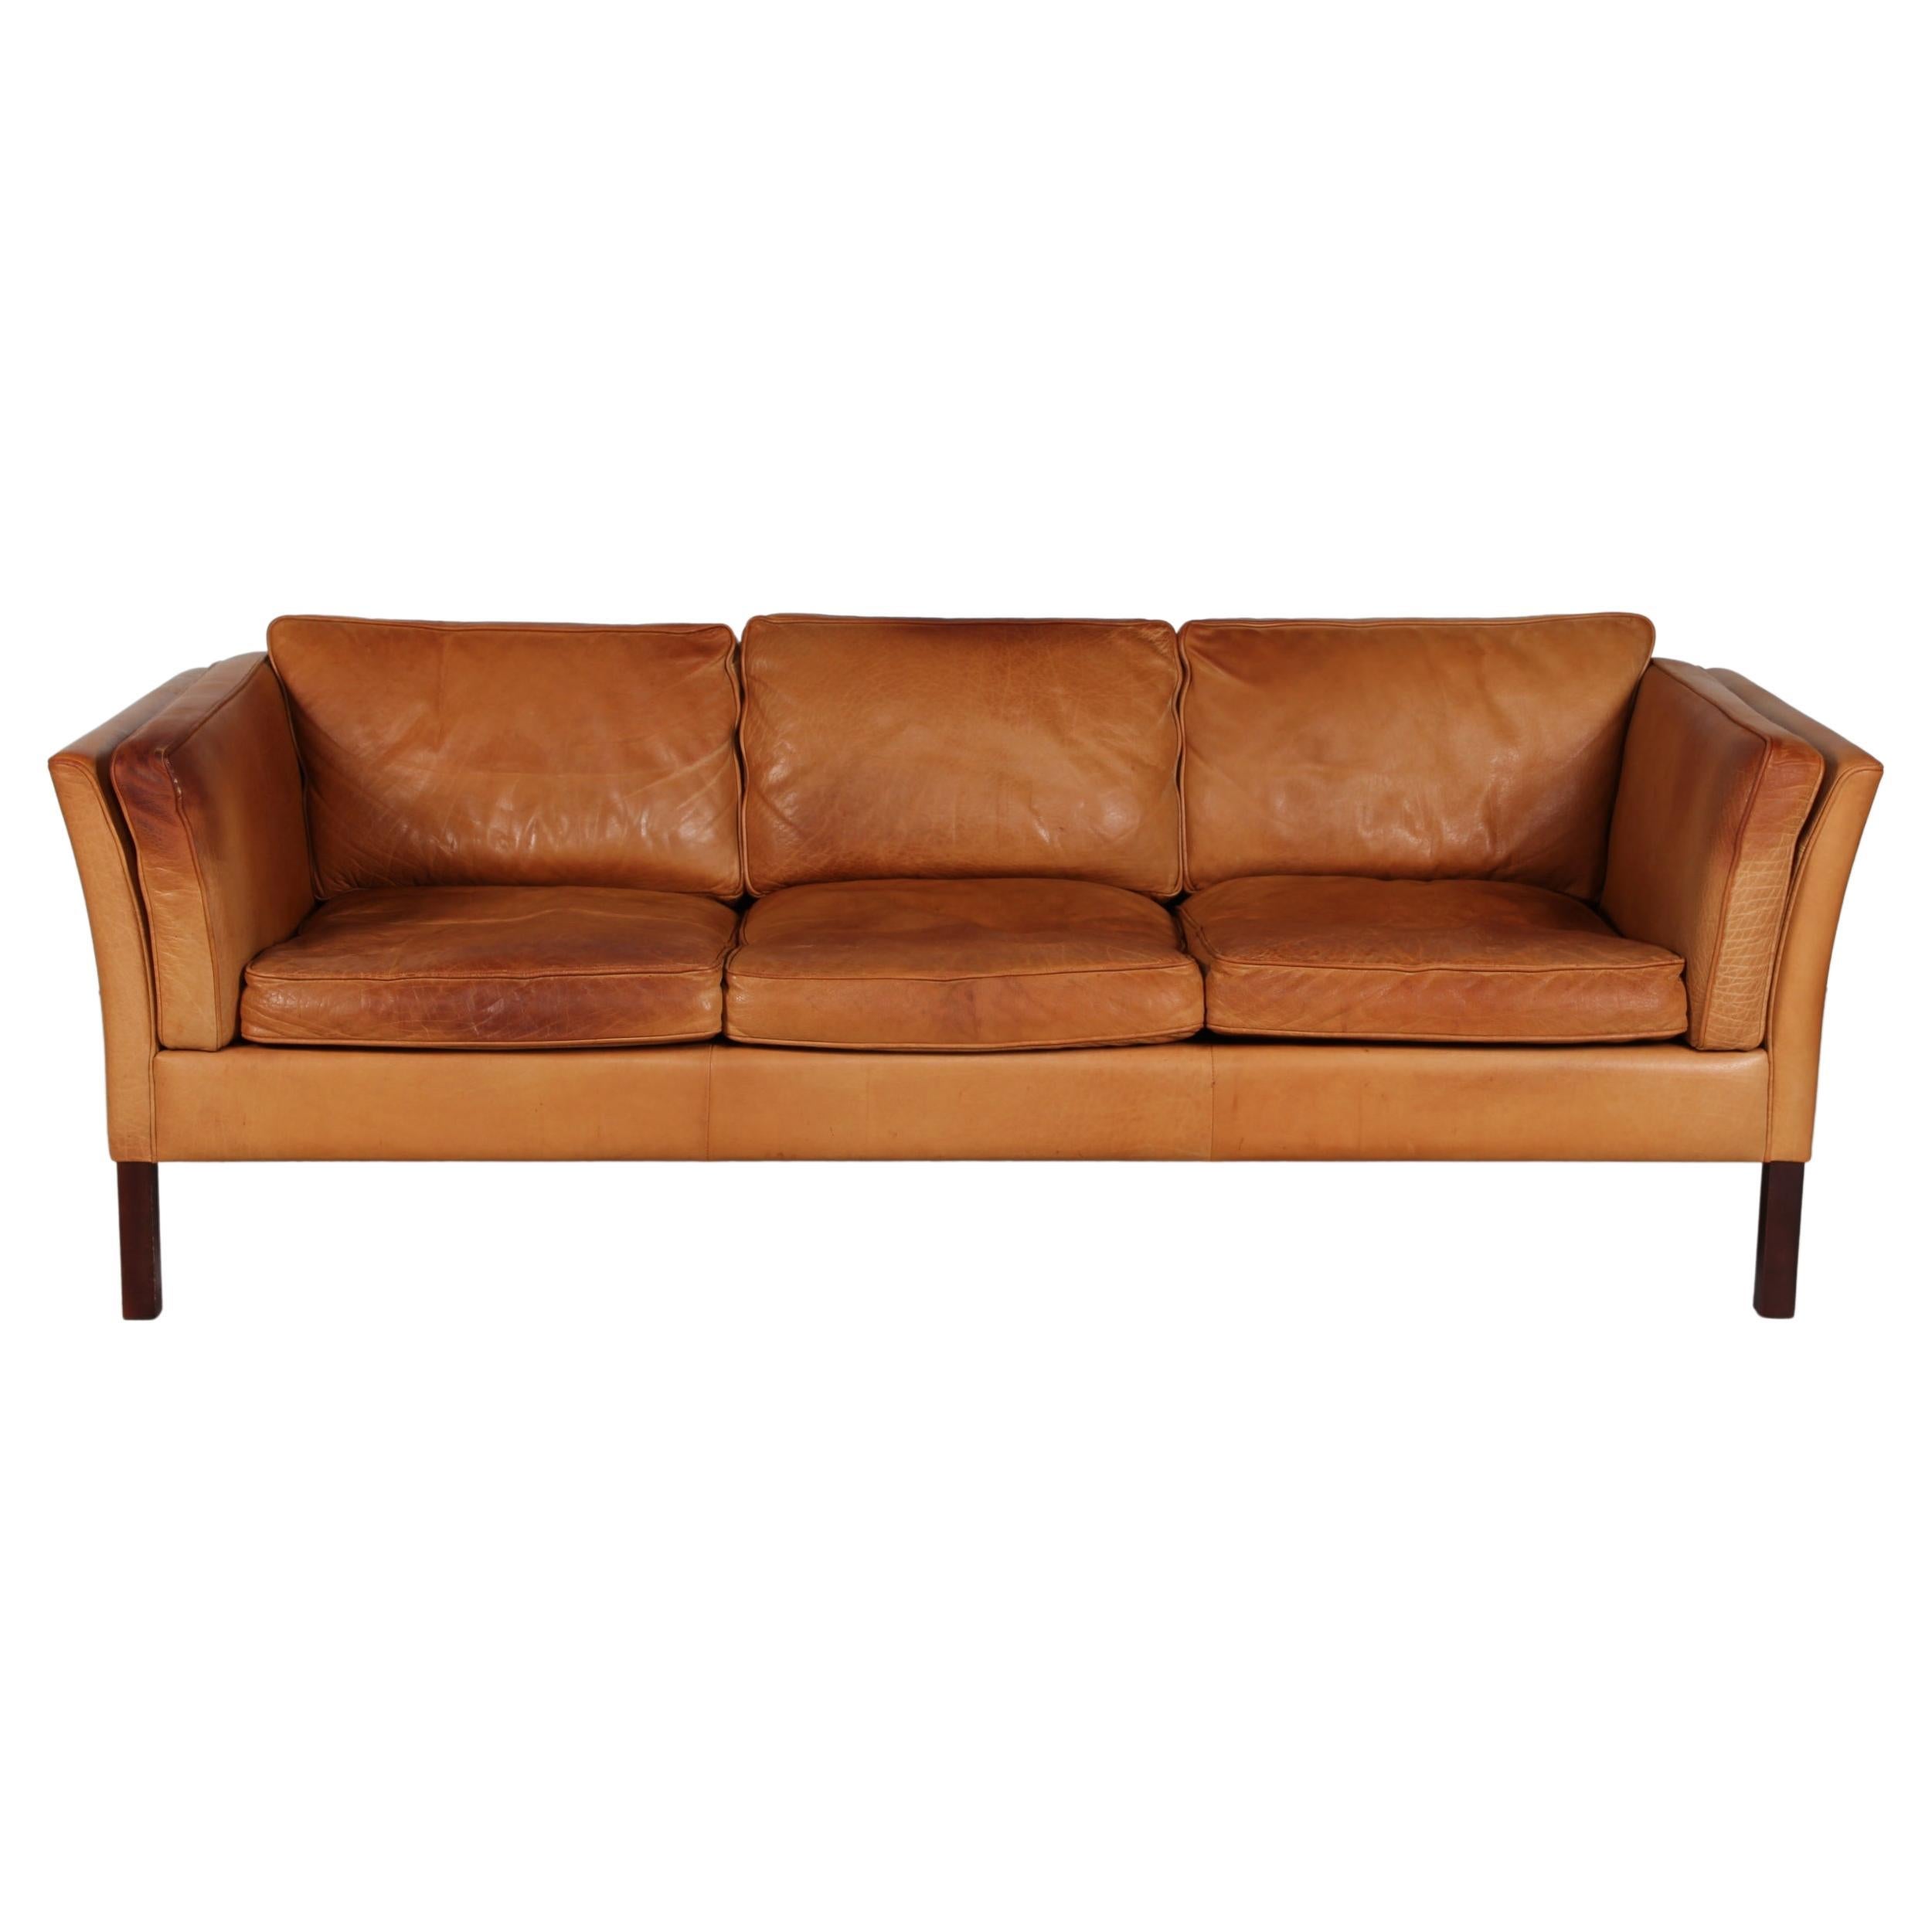 Danish Modern 3-Seat Sofa with Patinated Cognac-Colored Leather 1970s by Stouby